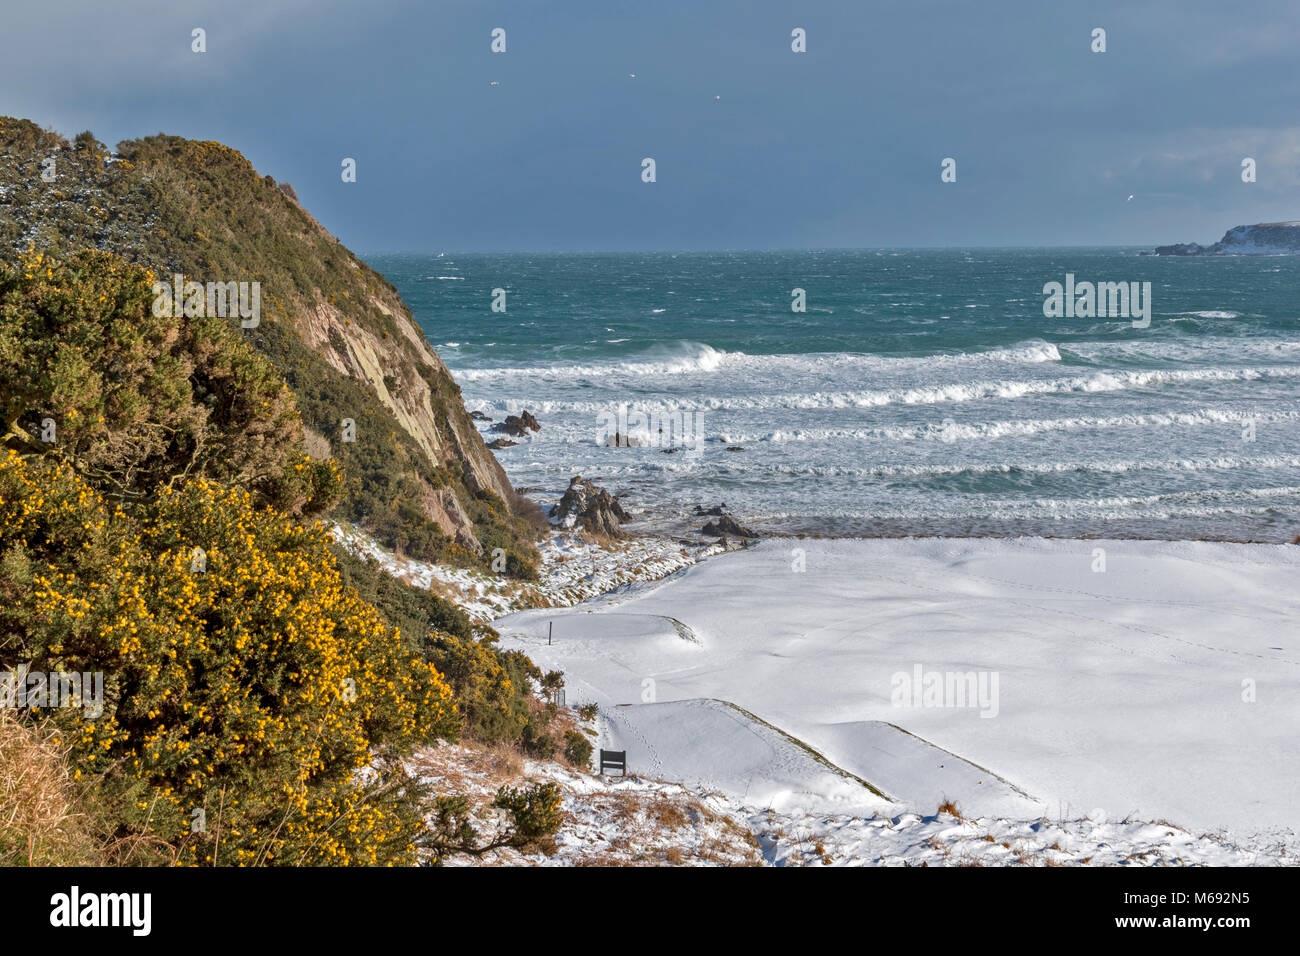 MORAY COAST SCOTLAND CULLEN BAY WITH A STORMY SEA WINTER SNOW ON THE GOLF COURSE AND YELLOW GORSE ON A CLIFF Stock Photo